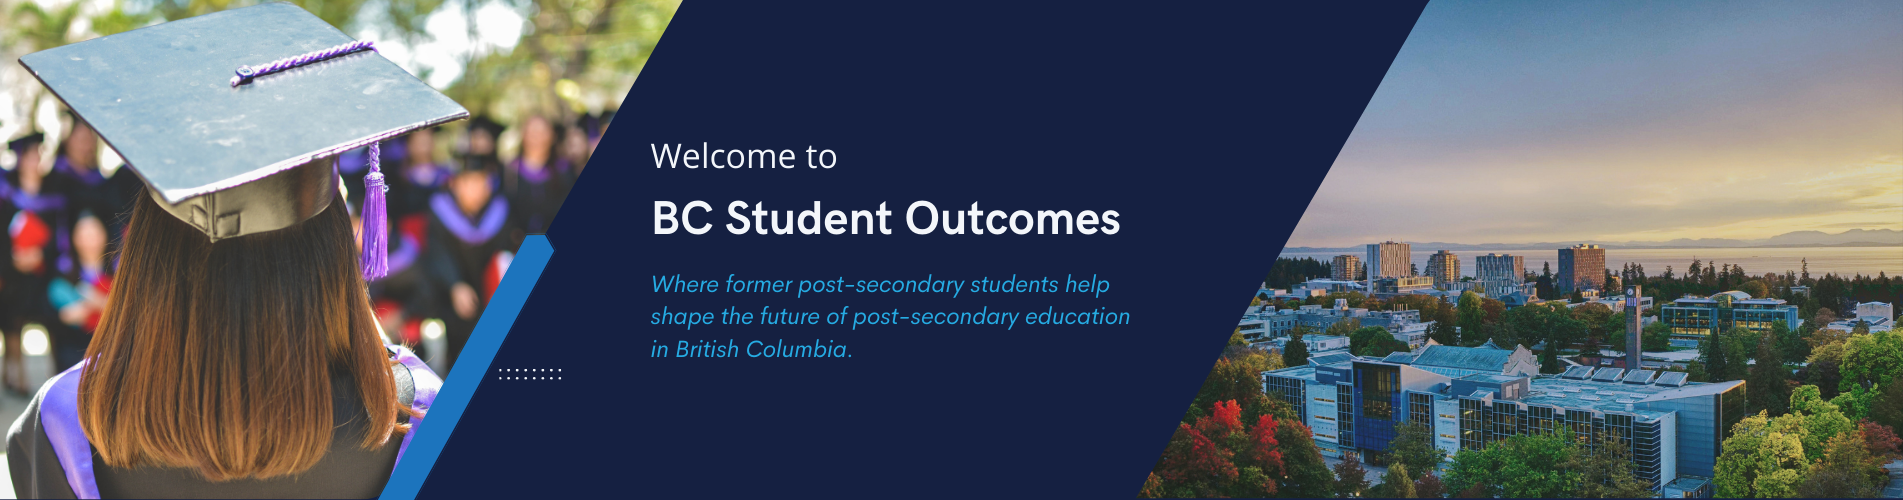 Banner text reads: Welcome to BC Student Outcomes... Where former post-secondary students help shape the future of post-secondary education in British Columbia.